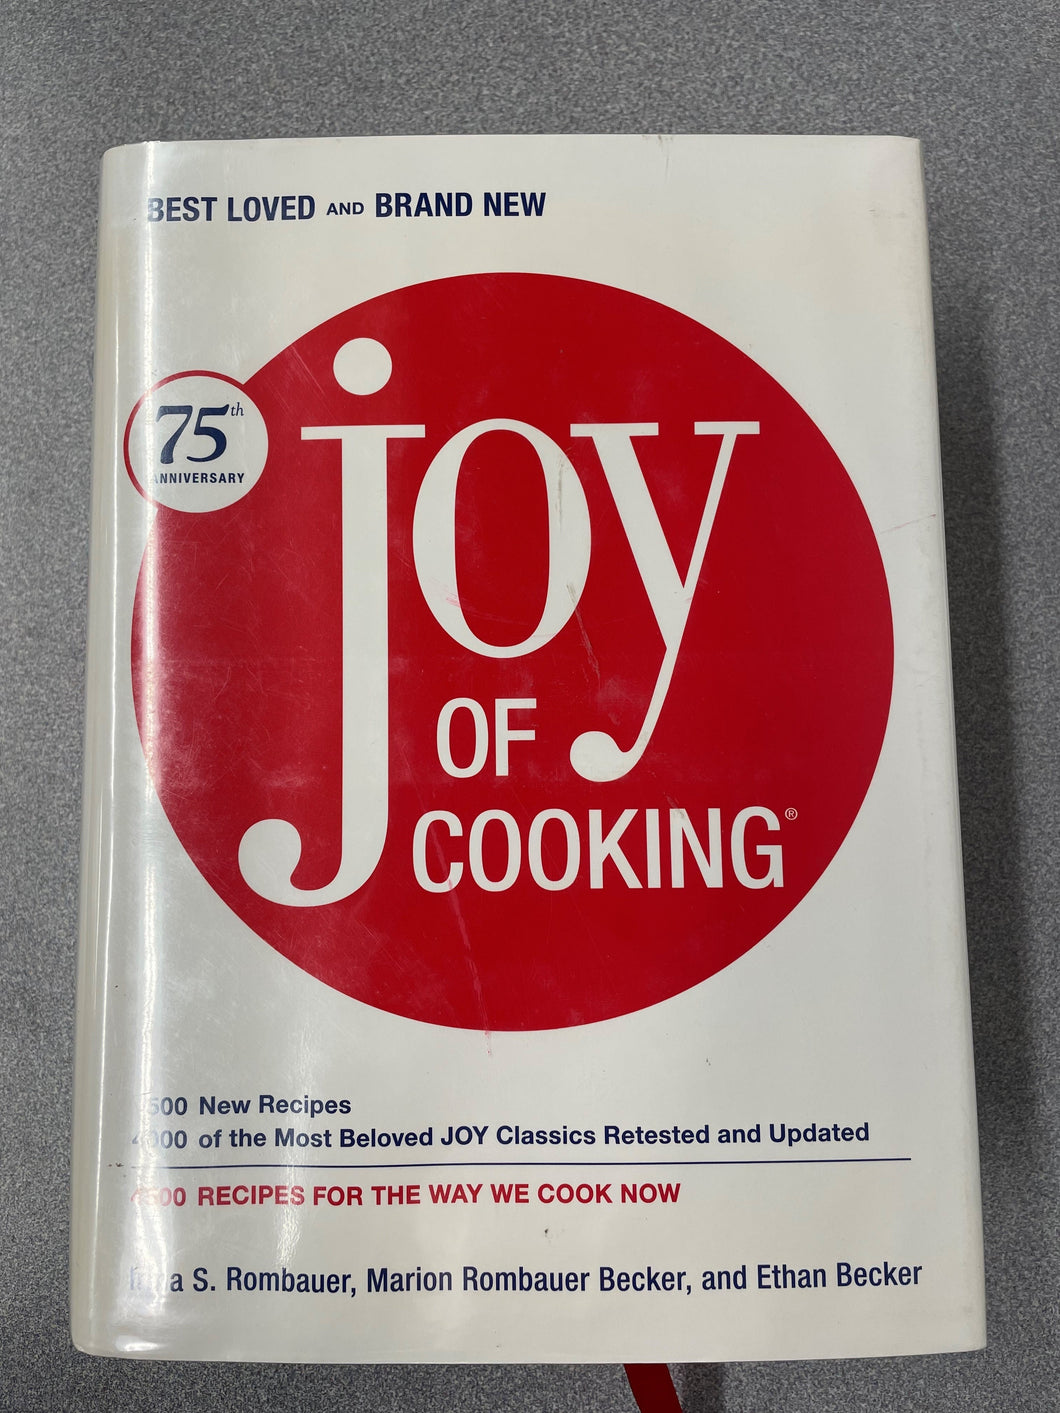 Joy of Cooking 75th Anniversary Edition, Rombauer, Irma, et al [2006] CO 8/23